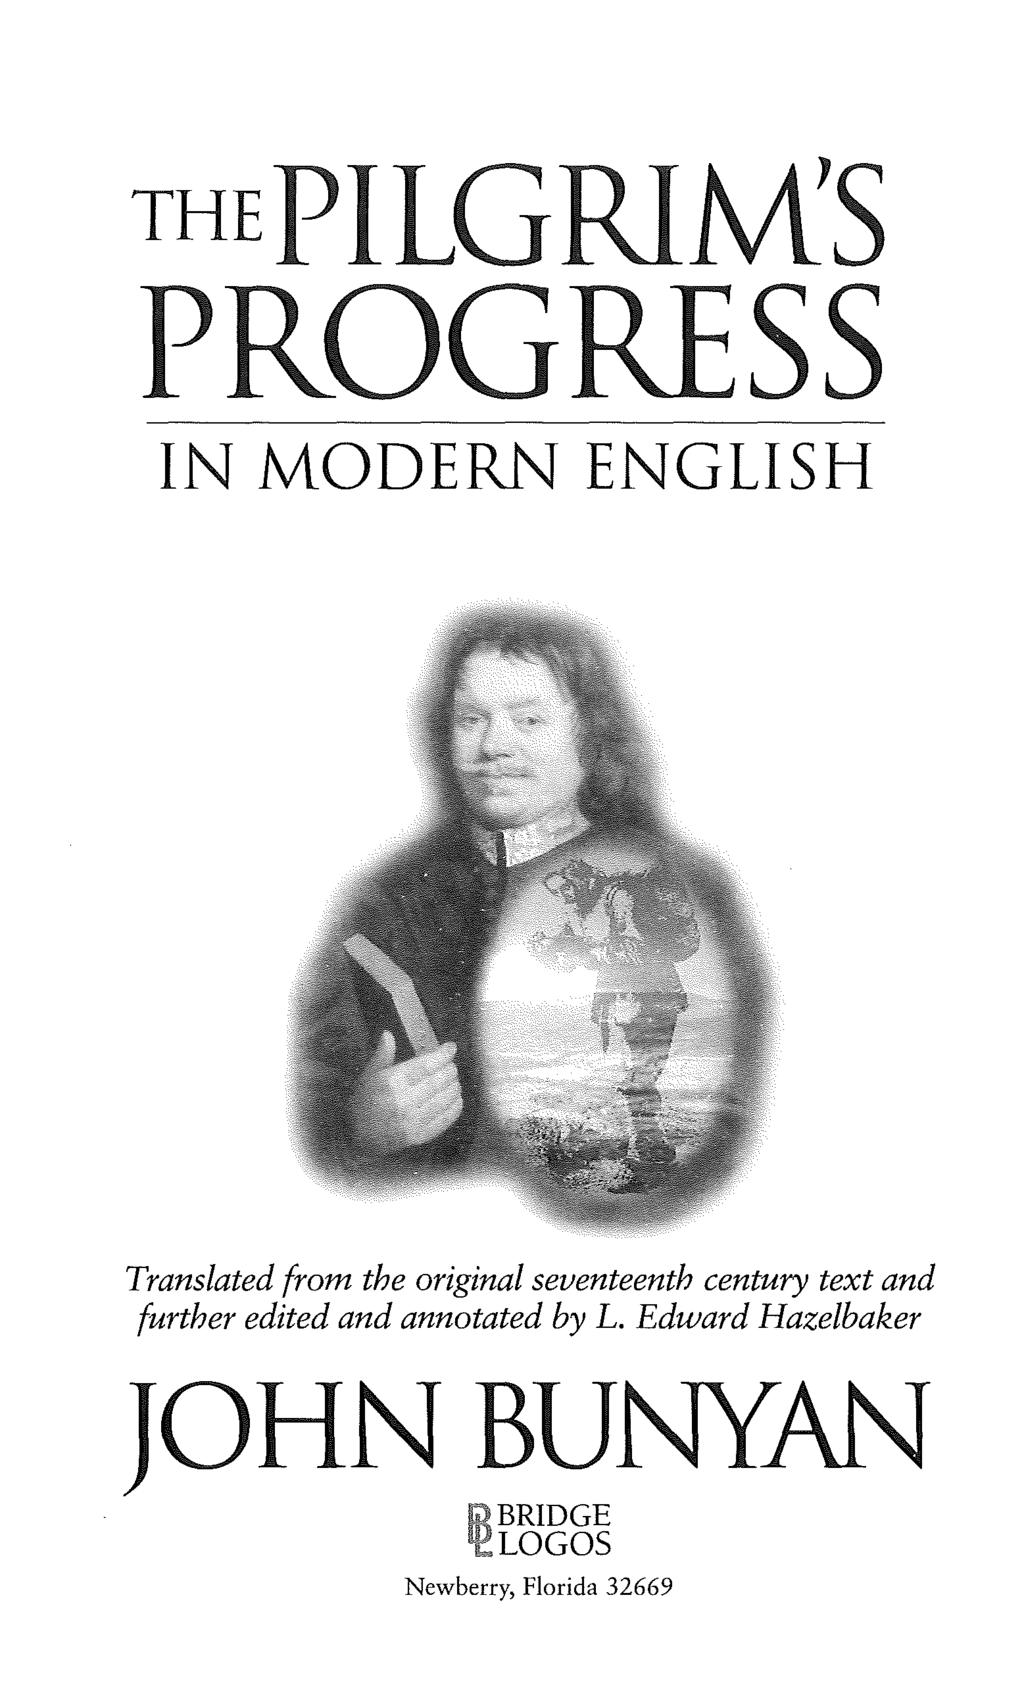 IN MODERN ENGLISH Translated from the original seventeenth century text and further